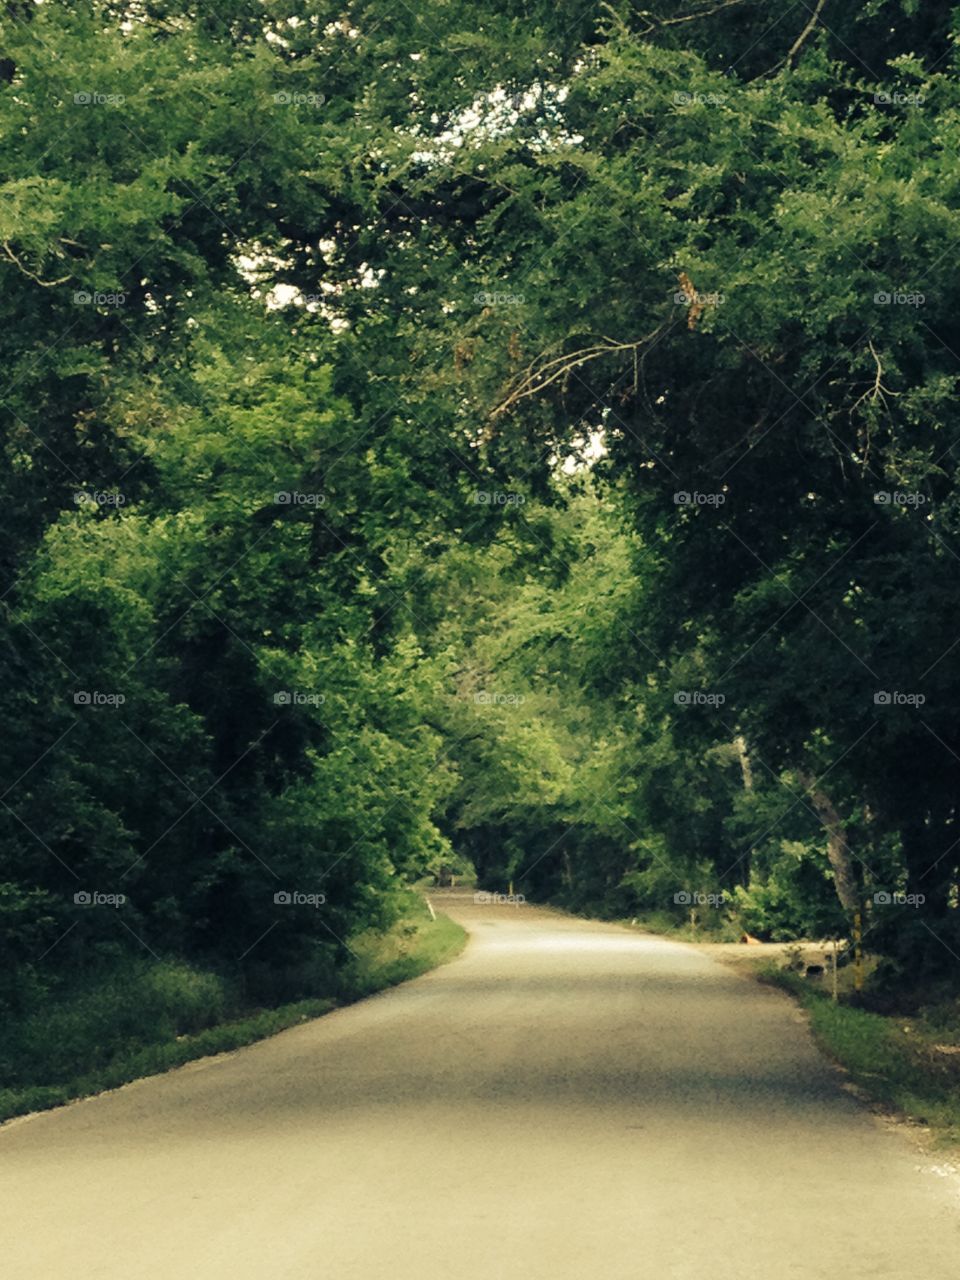 Inviting country road with a tree canopy to keep it cool